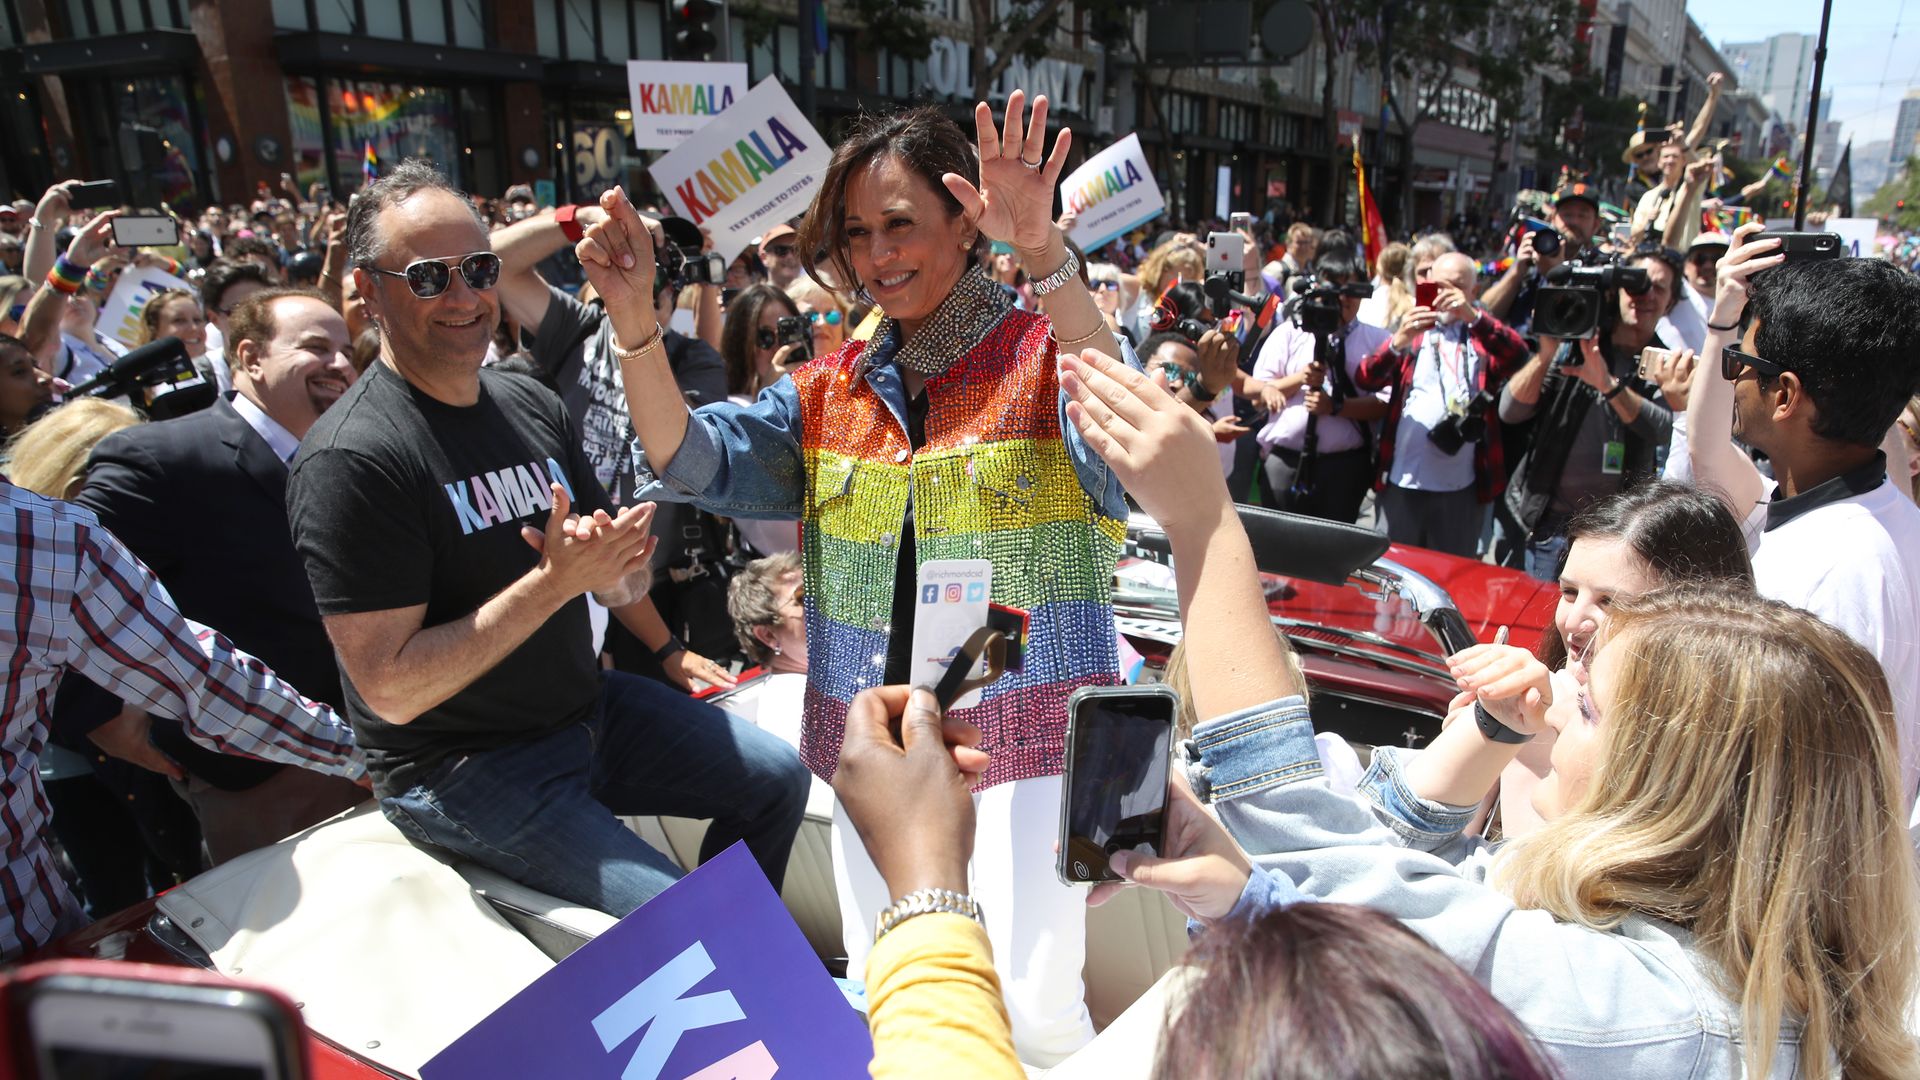 Democratic presidential candidate U.S. Sen. Kamala Harris (D-CA) waves as she rides in a car during the SF Pride Parade on June 30, 2019 in San Francisco, California. 